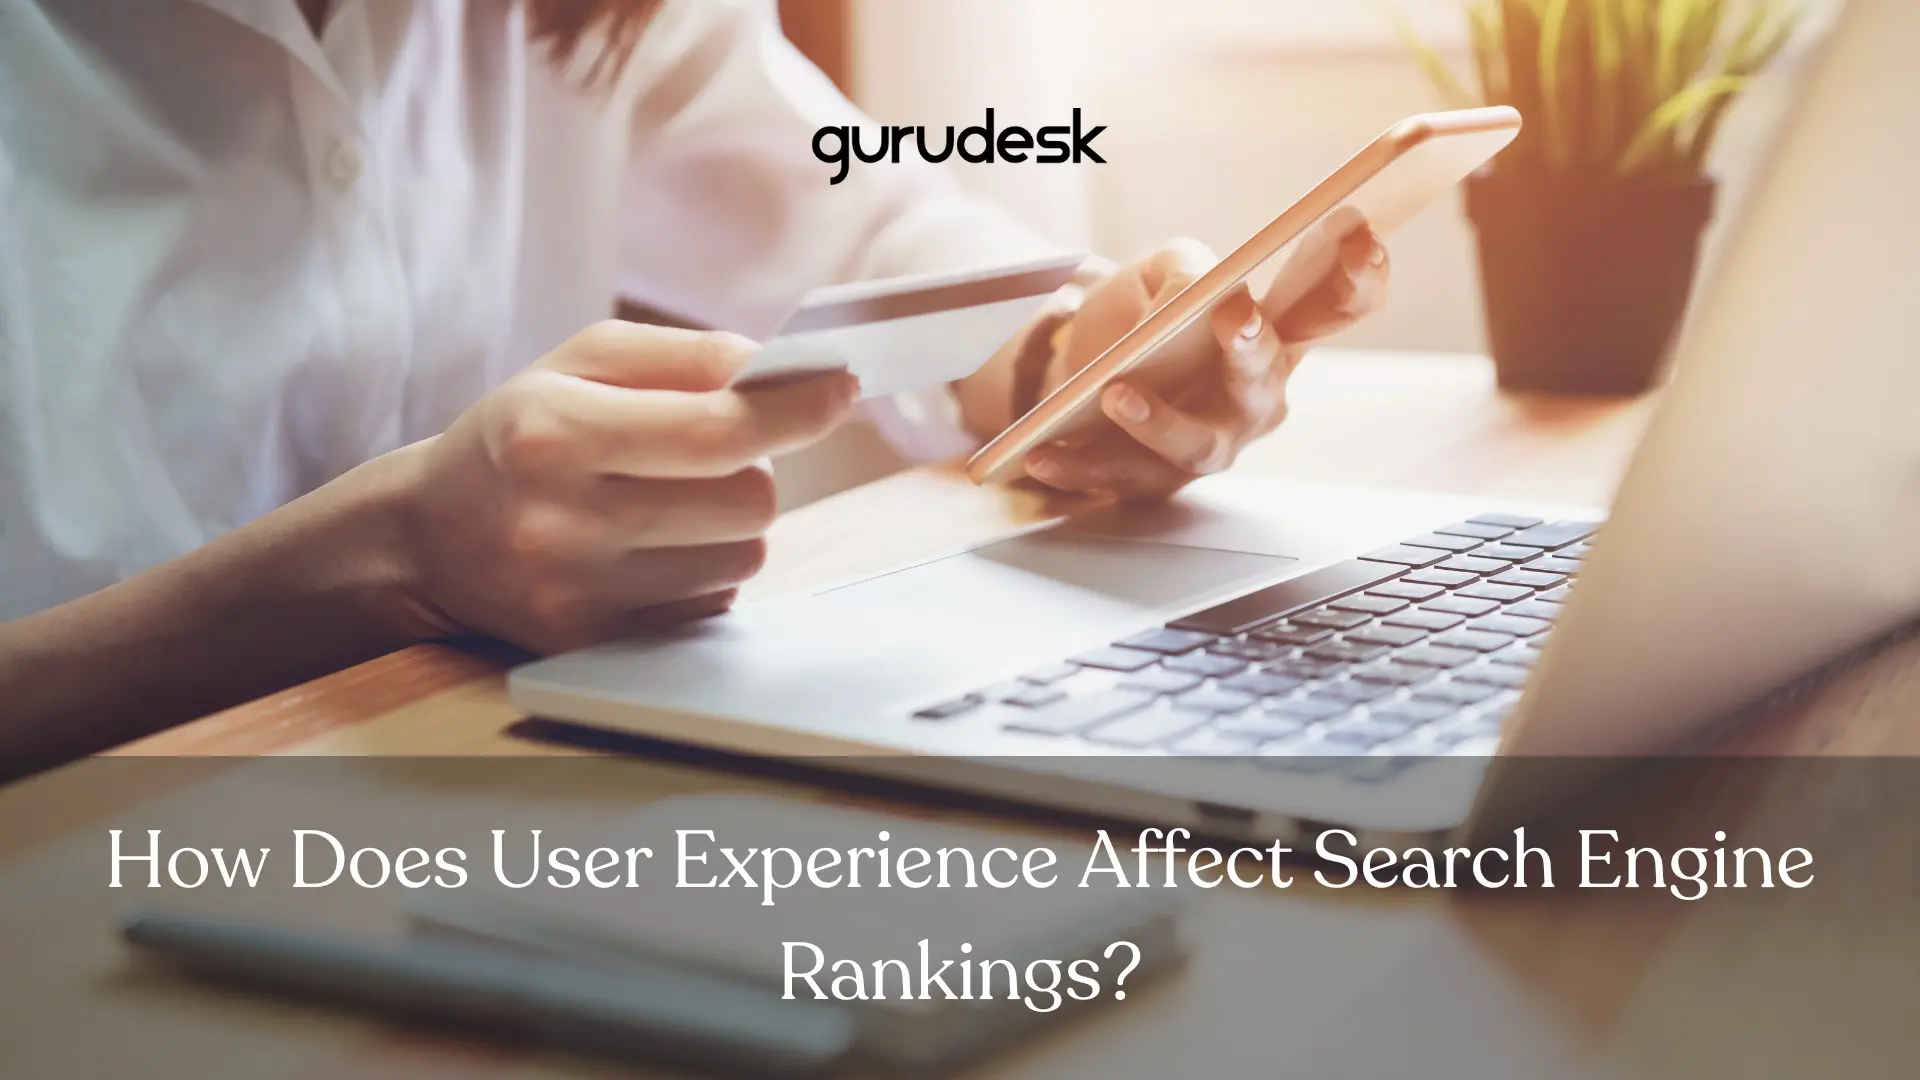 How does user experience affect search engine rankings?